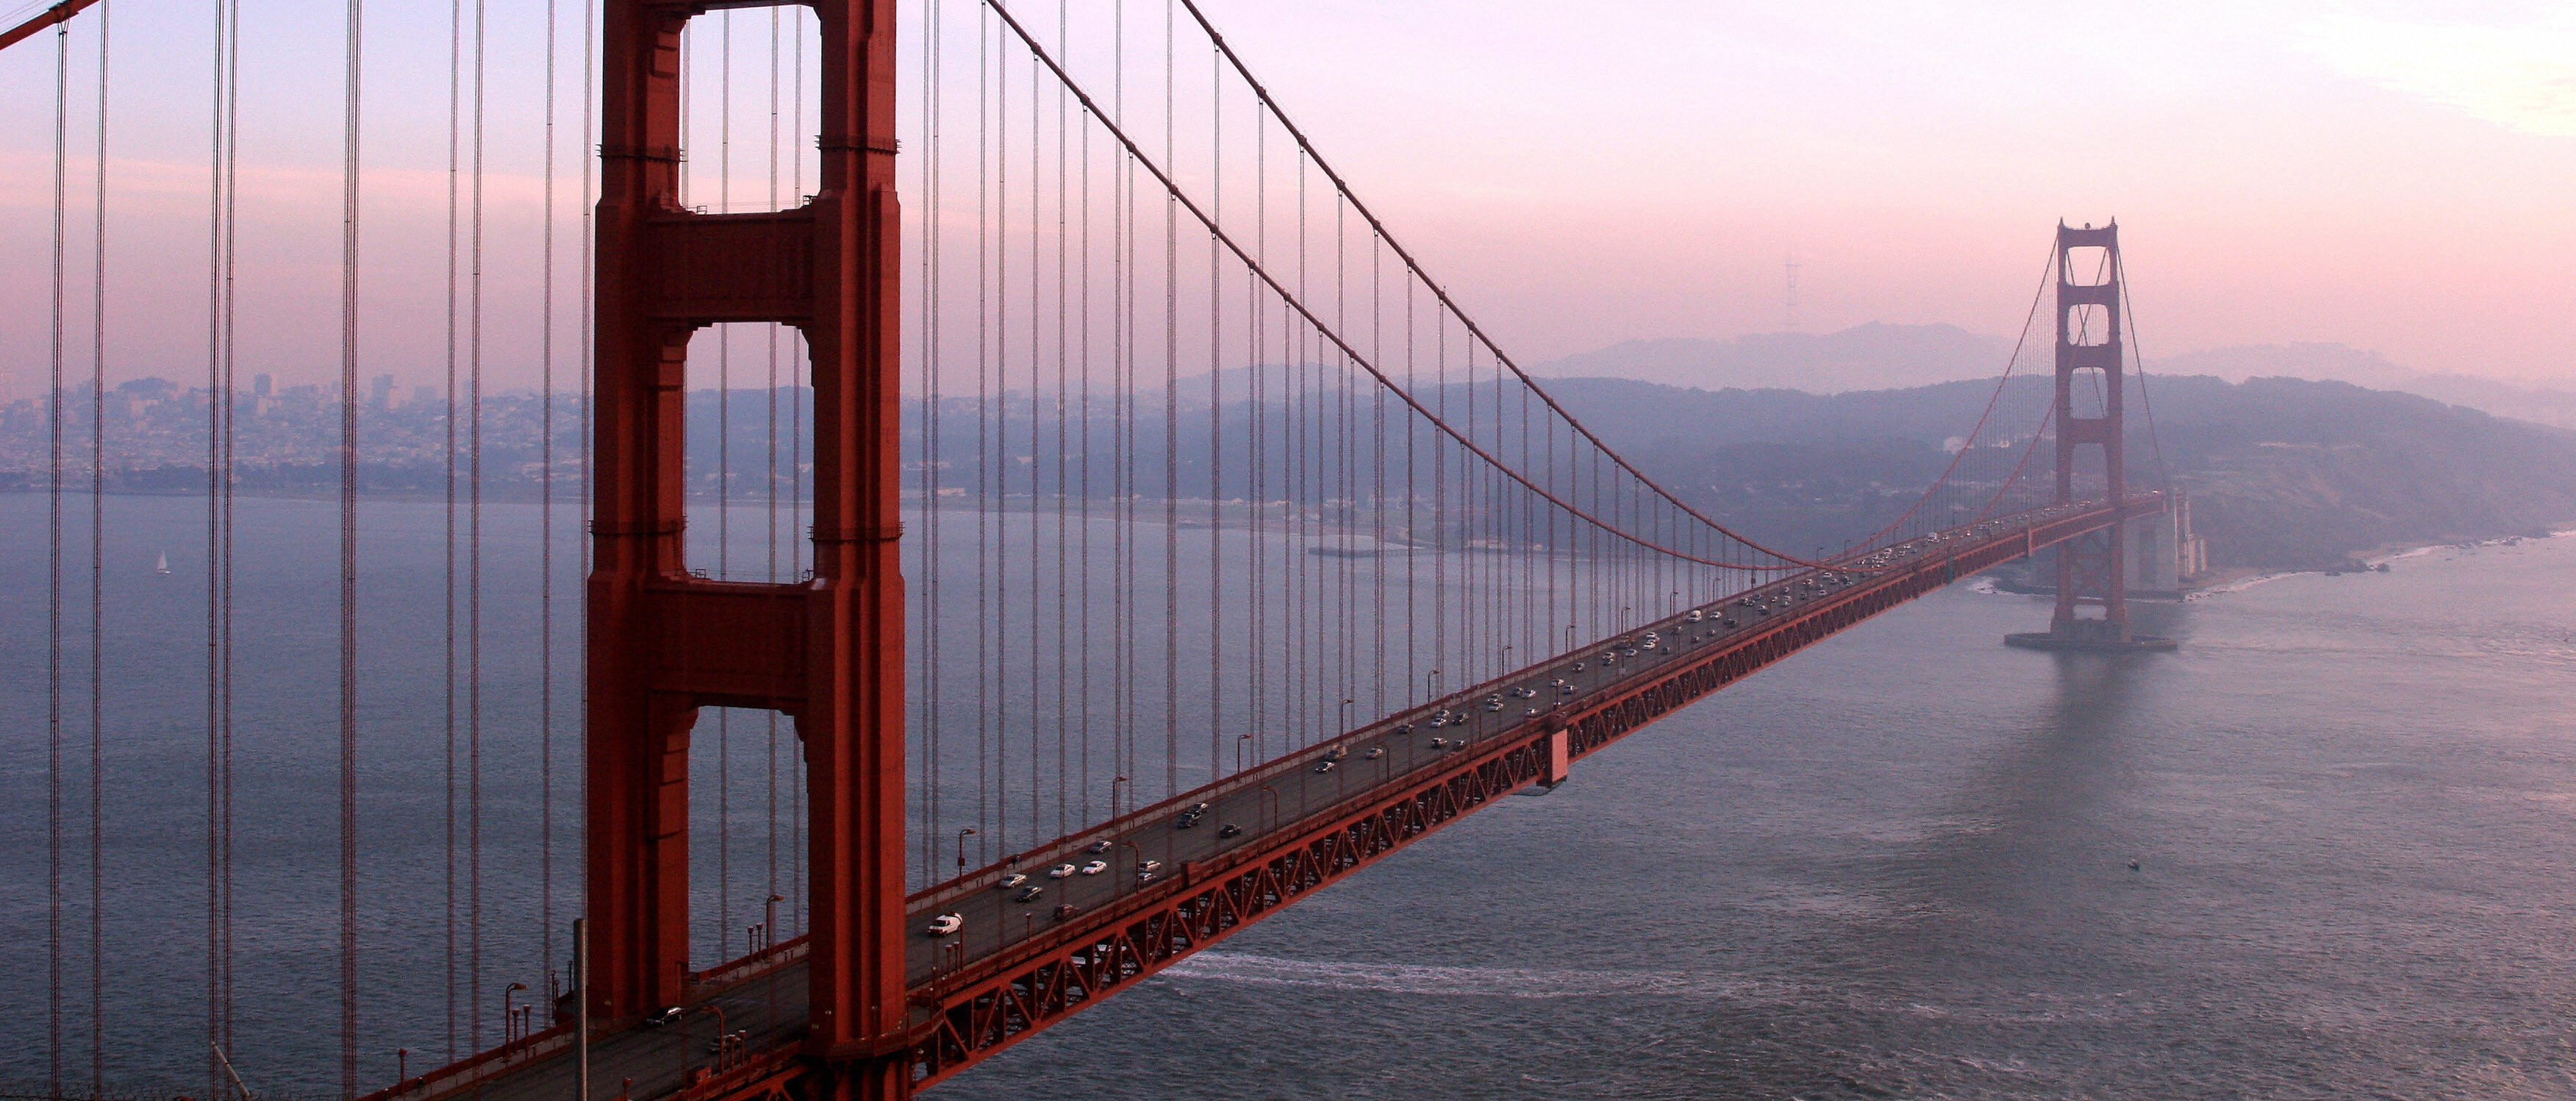 San Francisco, UNITED STATES: The Golden Gate Bridge is pictured 20 December 2006 in San Francisco, California. The Golden Gate is a suspension bridge spanning the Golden Gate, the opening into San Francisco Bay from the Pacific Ocean. It connects the city of San Francisco on the northern tip of the San Francisco Peninsula to Marin County as part of US Highway 101 and California State Highway 1. The largest suspension bridge in the world when it was completed in 1937, it has become an internationally recognized symbol of San Francisco and America. It is currently the second longest suspension bridge in the United States after the Verrazano-Narrows Bridge in New York City. AFP PHOTO/GABRIEL BOUYS (Photo credit should read GABRIEL BOUYS/AFP/Getty Images)